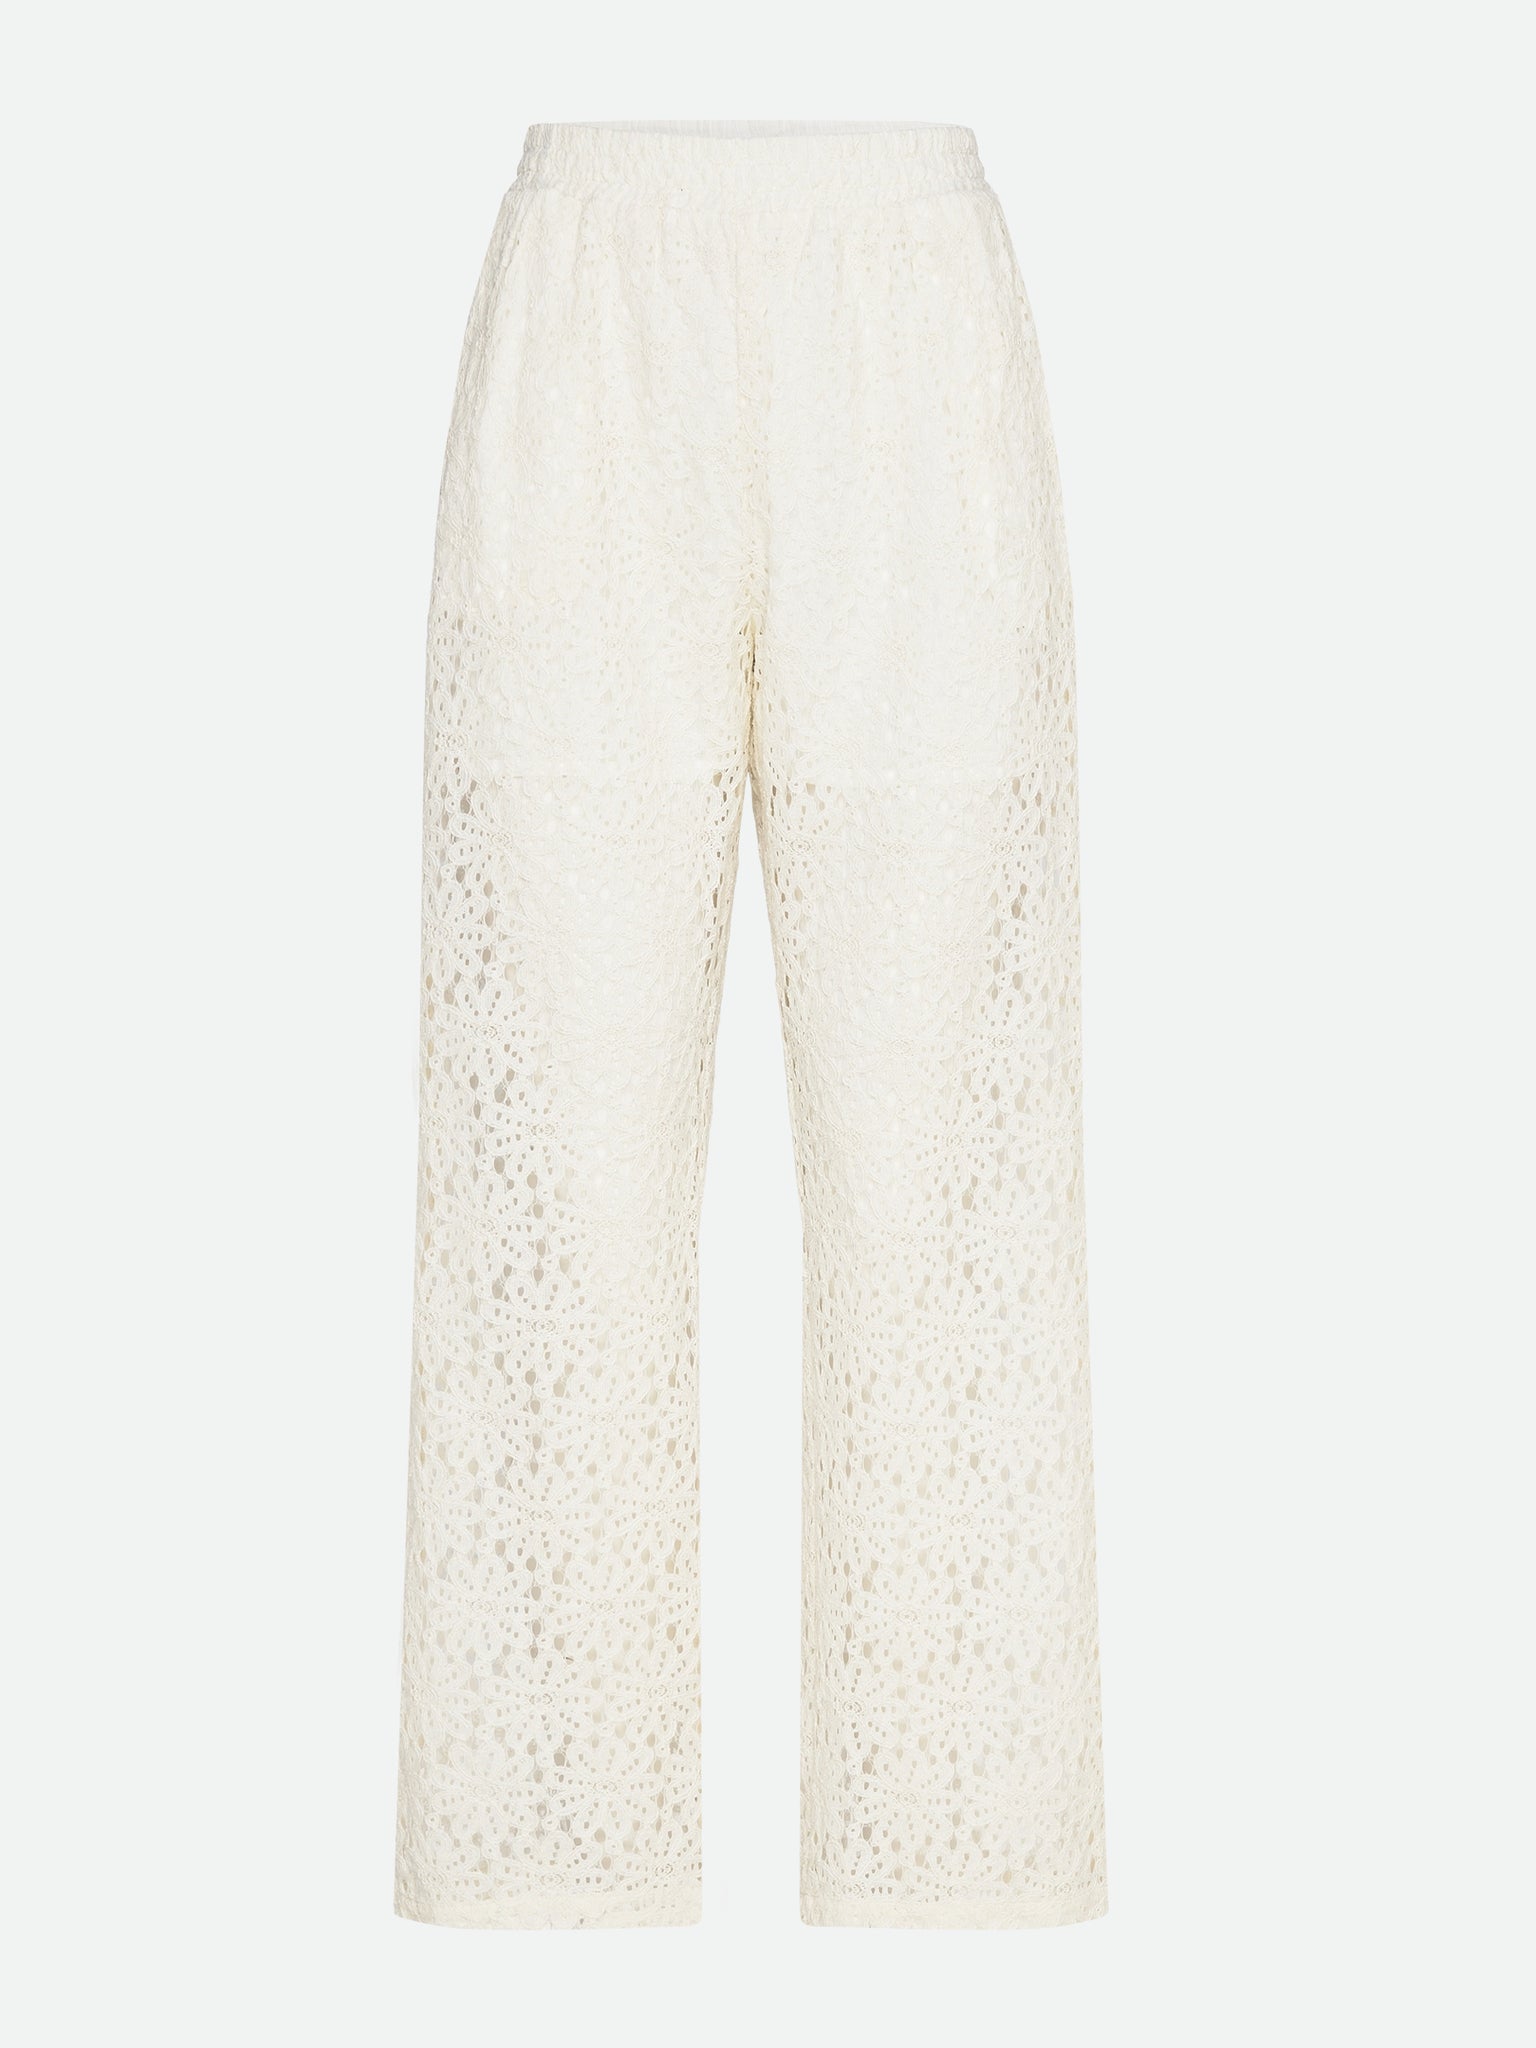 Lace trousers